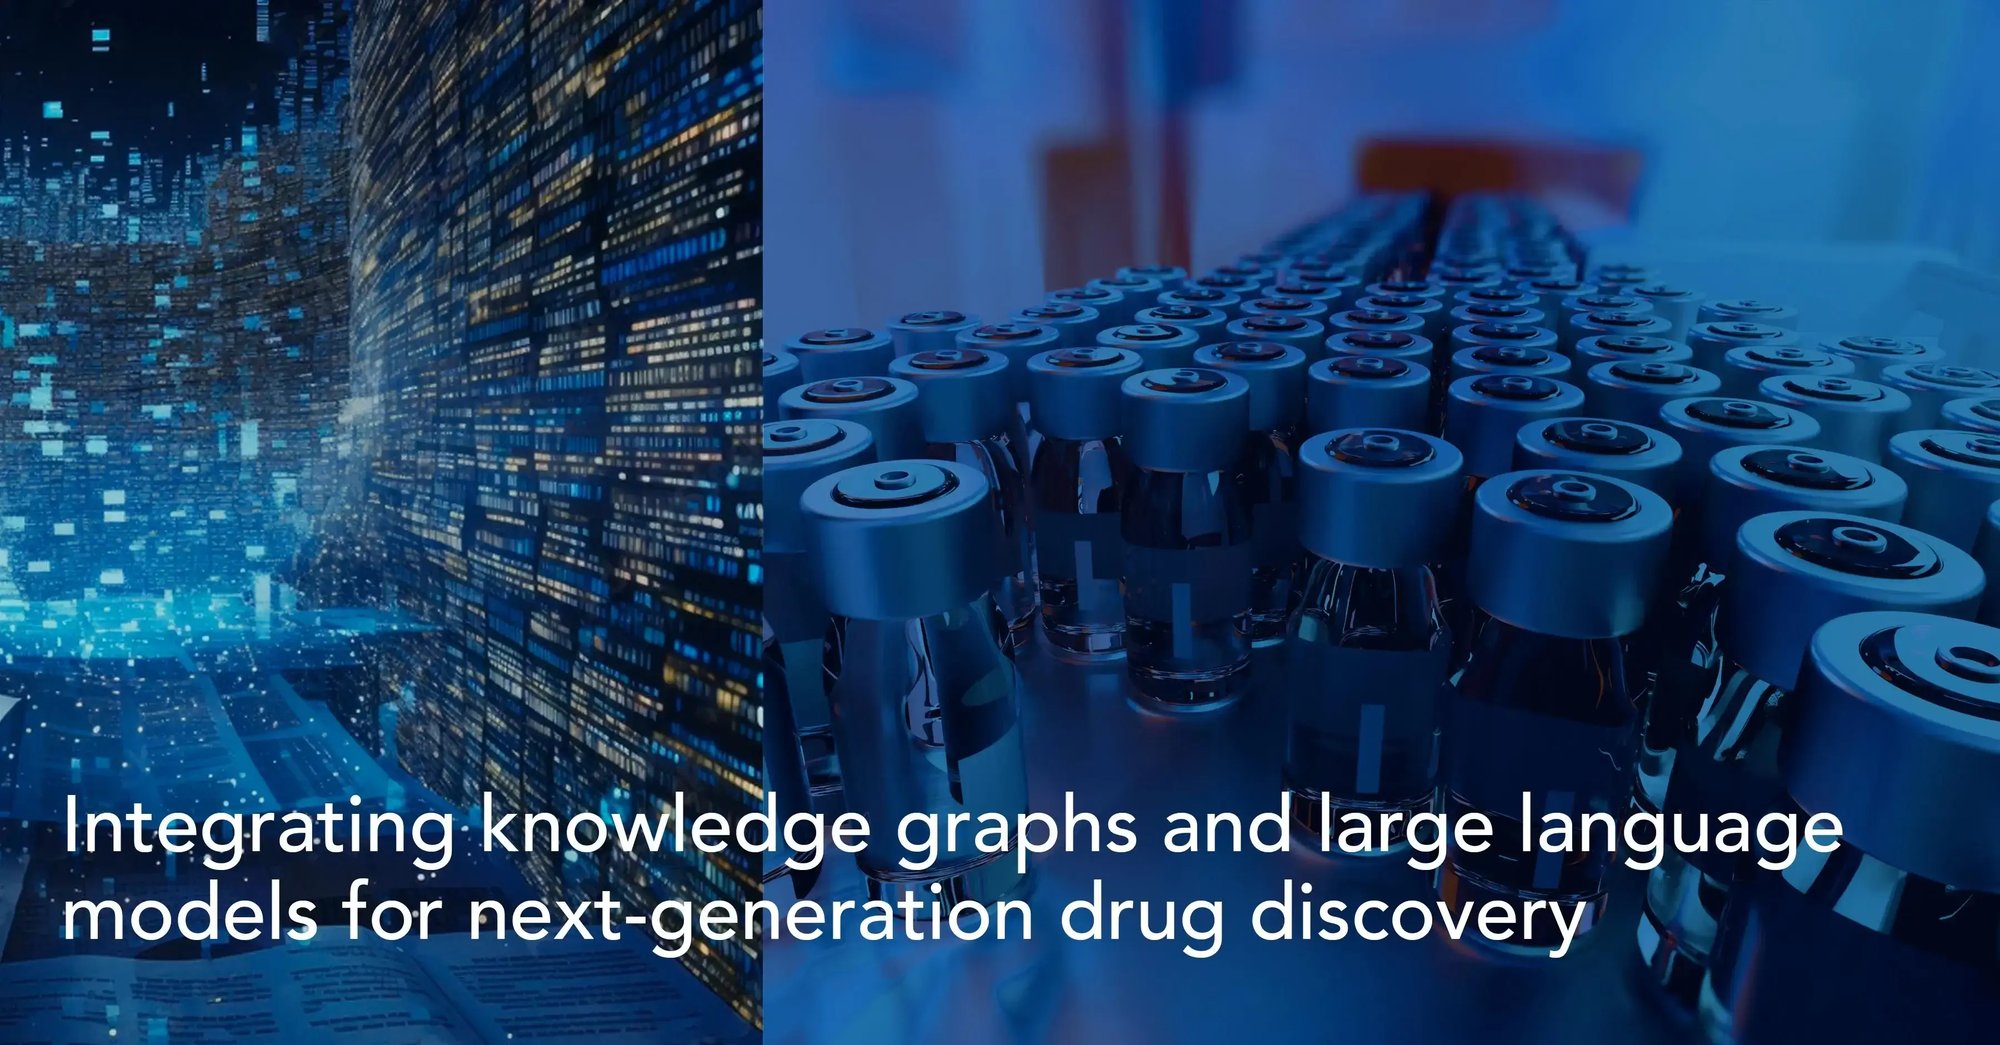 Integrating knowledge graphs and large language models for next-generation drug discovery3